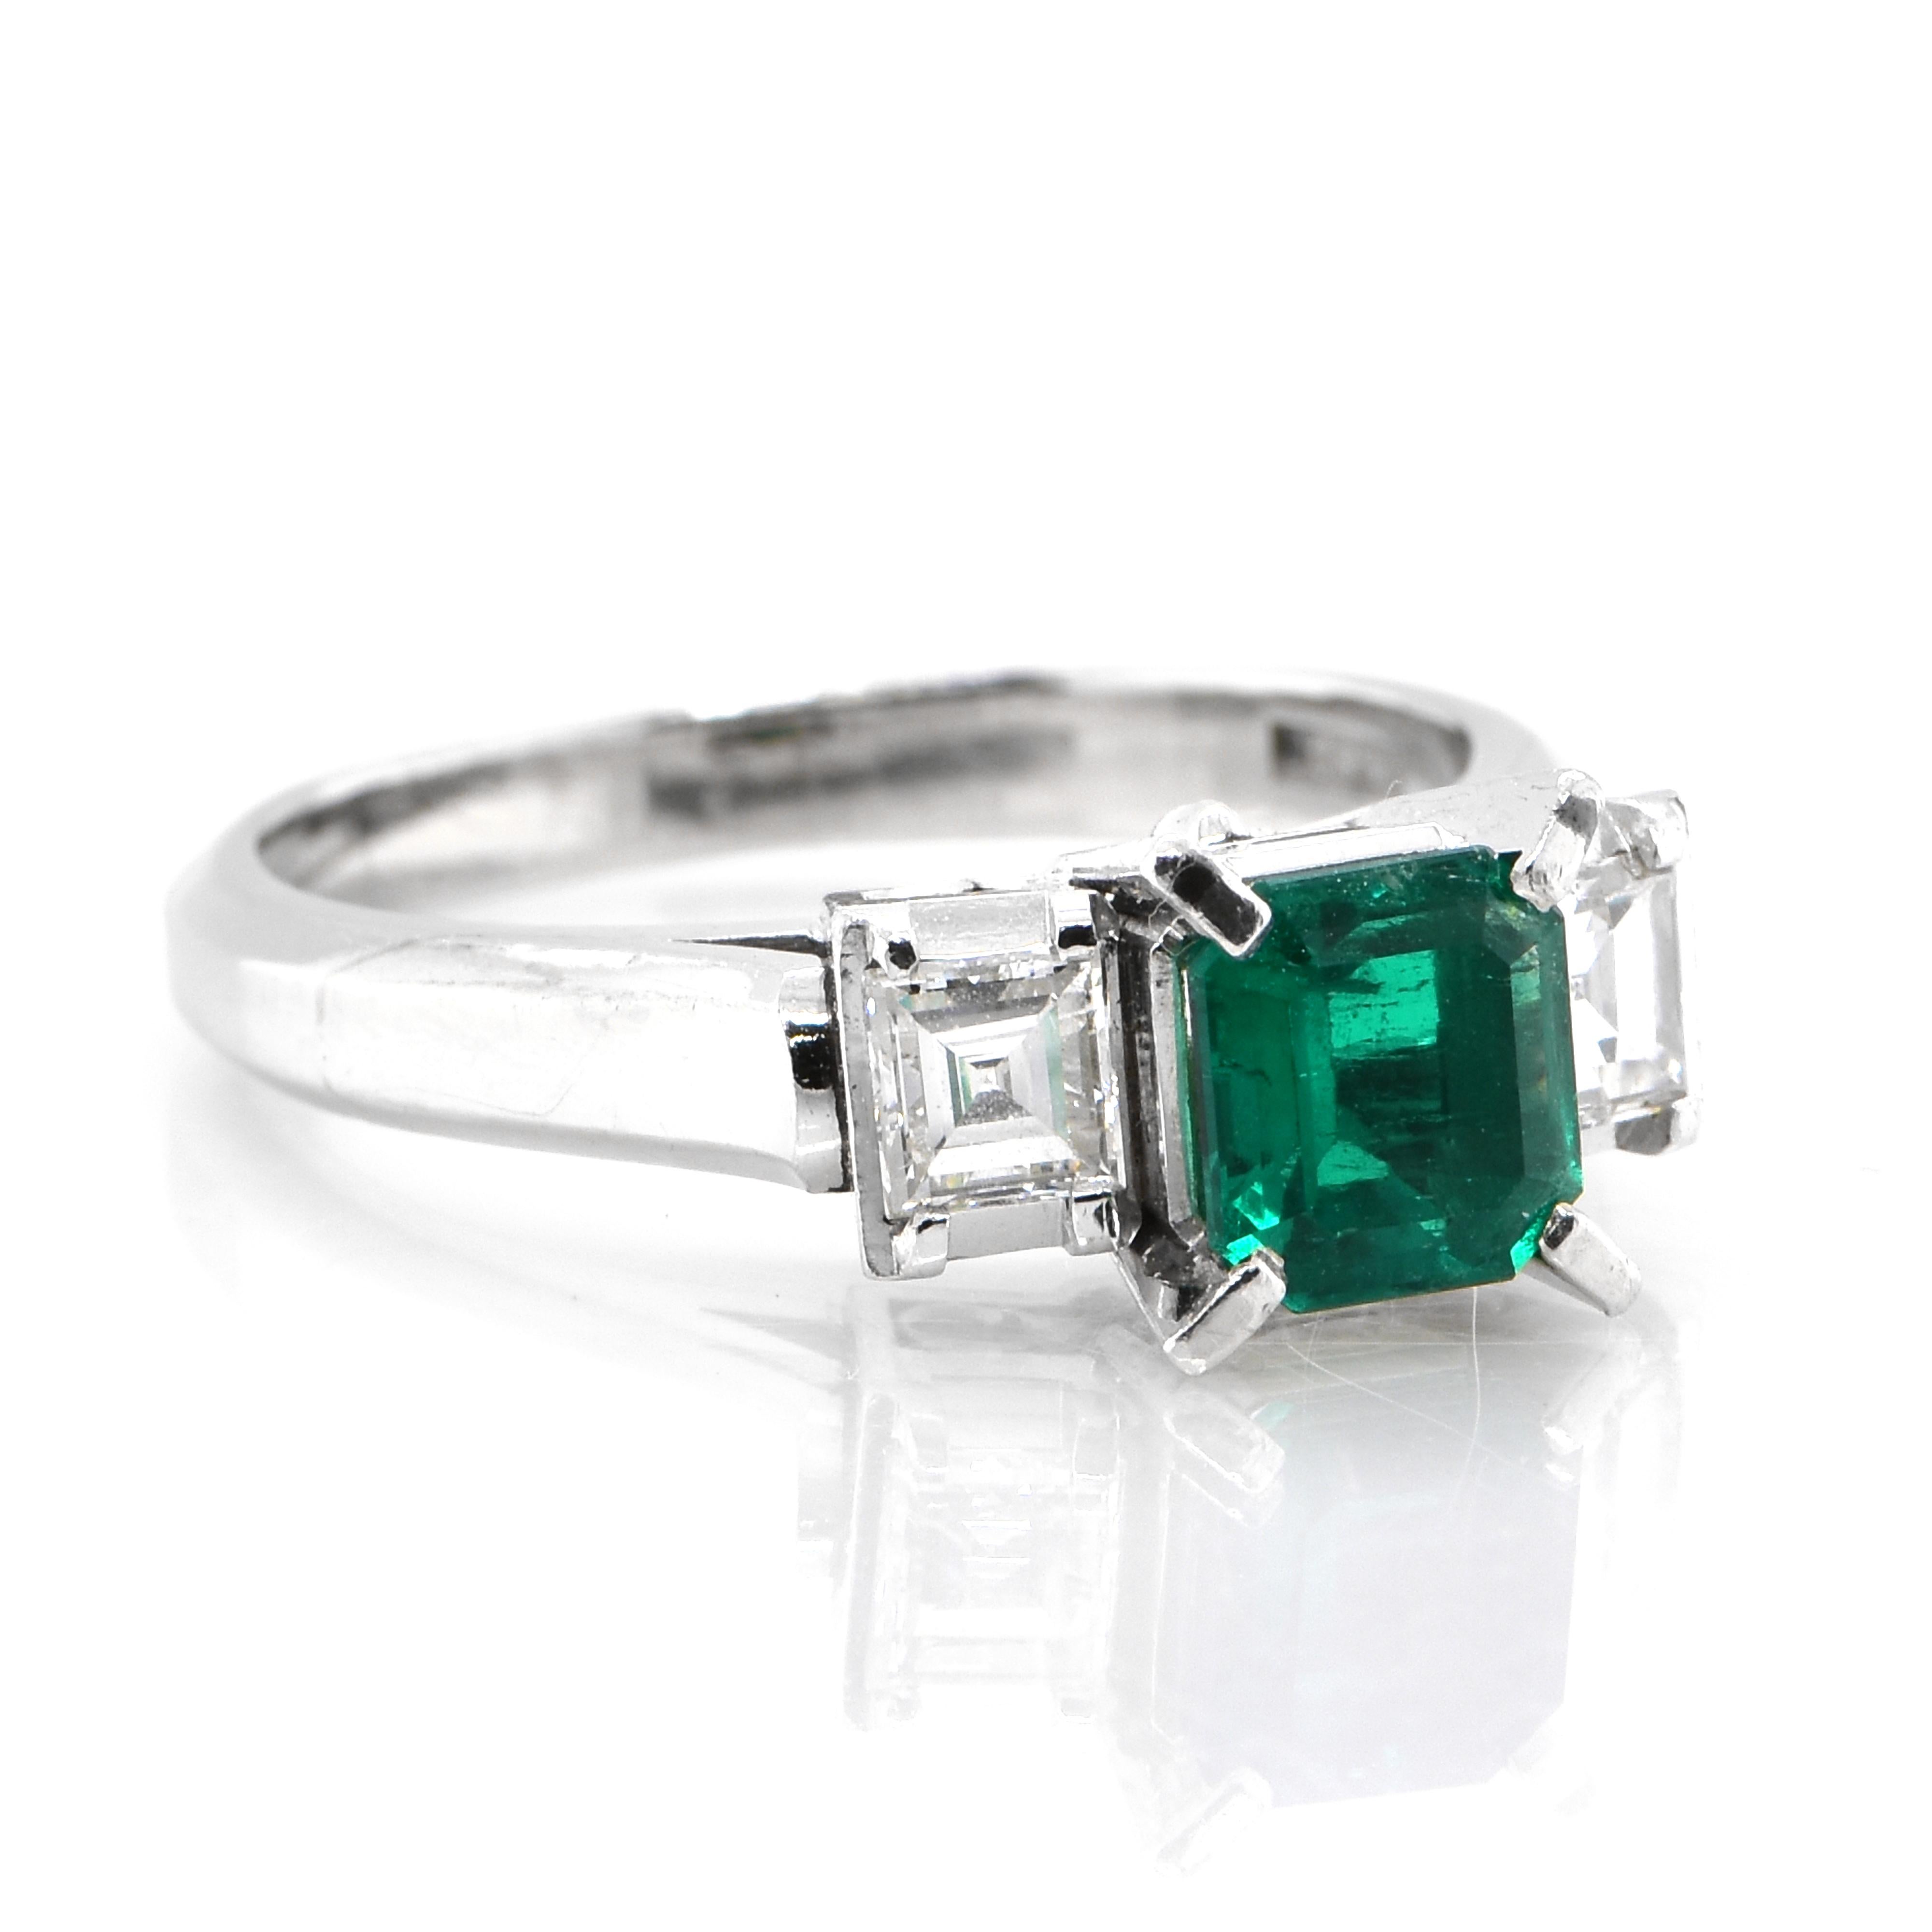 A stunning ring featuring a GIA Certified 0.97 Carat Natural, Colombian, Untreated (No Oil) Emerald and 0.51 Carats of Diamond Accents set in Platinum. People have admired emerald’s green for thousands of years. Emeralds have always been associated